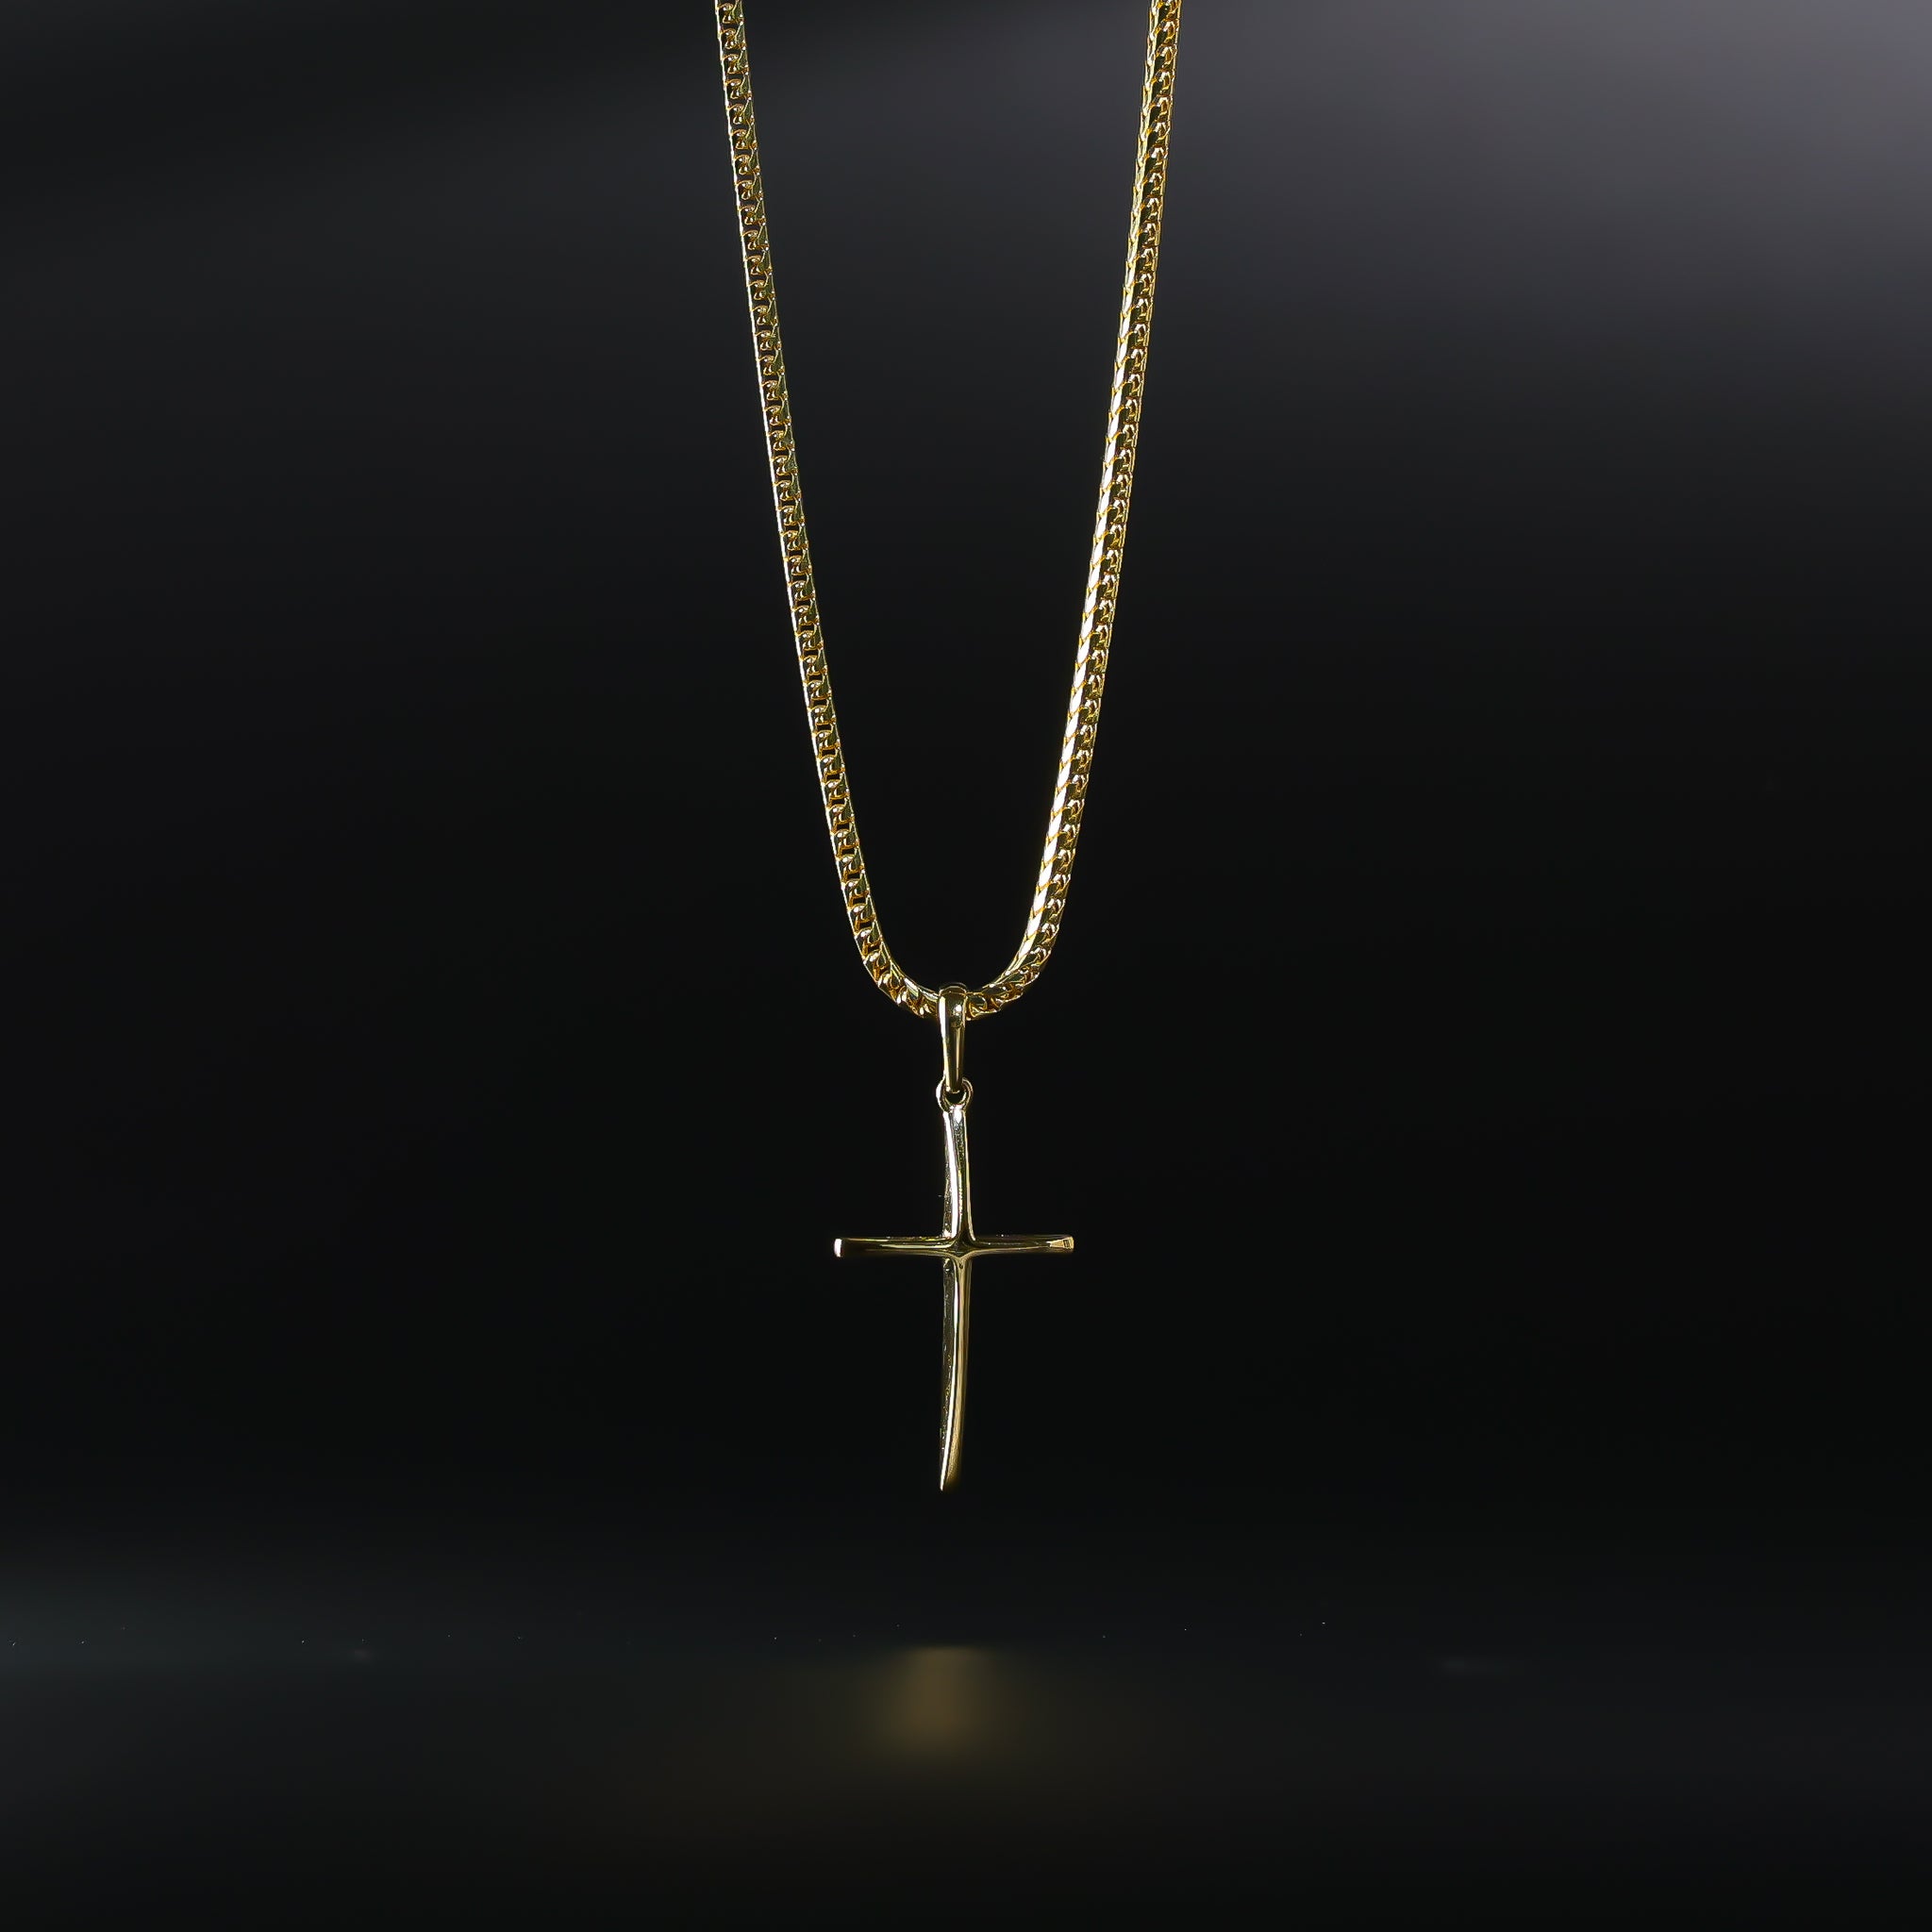 Dainty Gold Classic Cross Religious Pendant - Charlie & Co. Jewelry